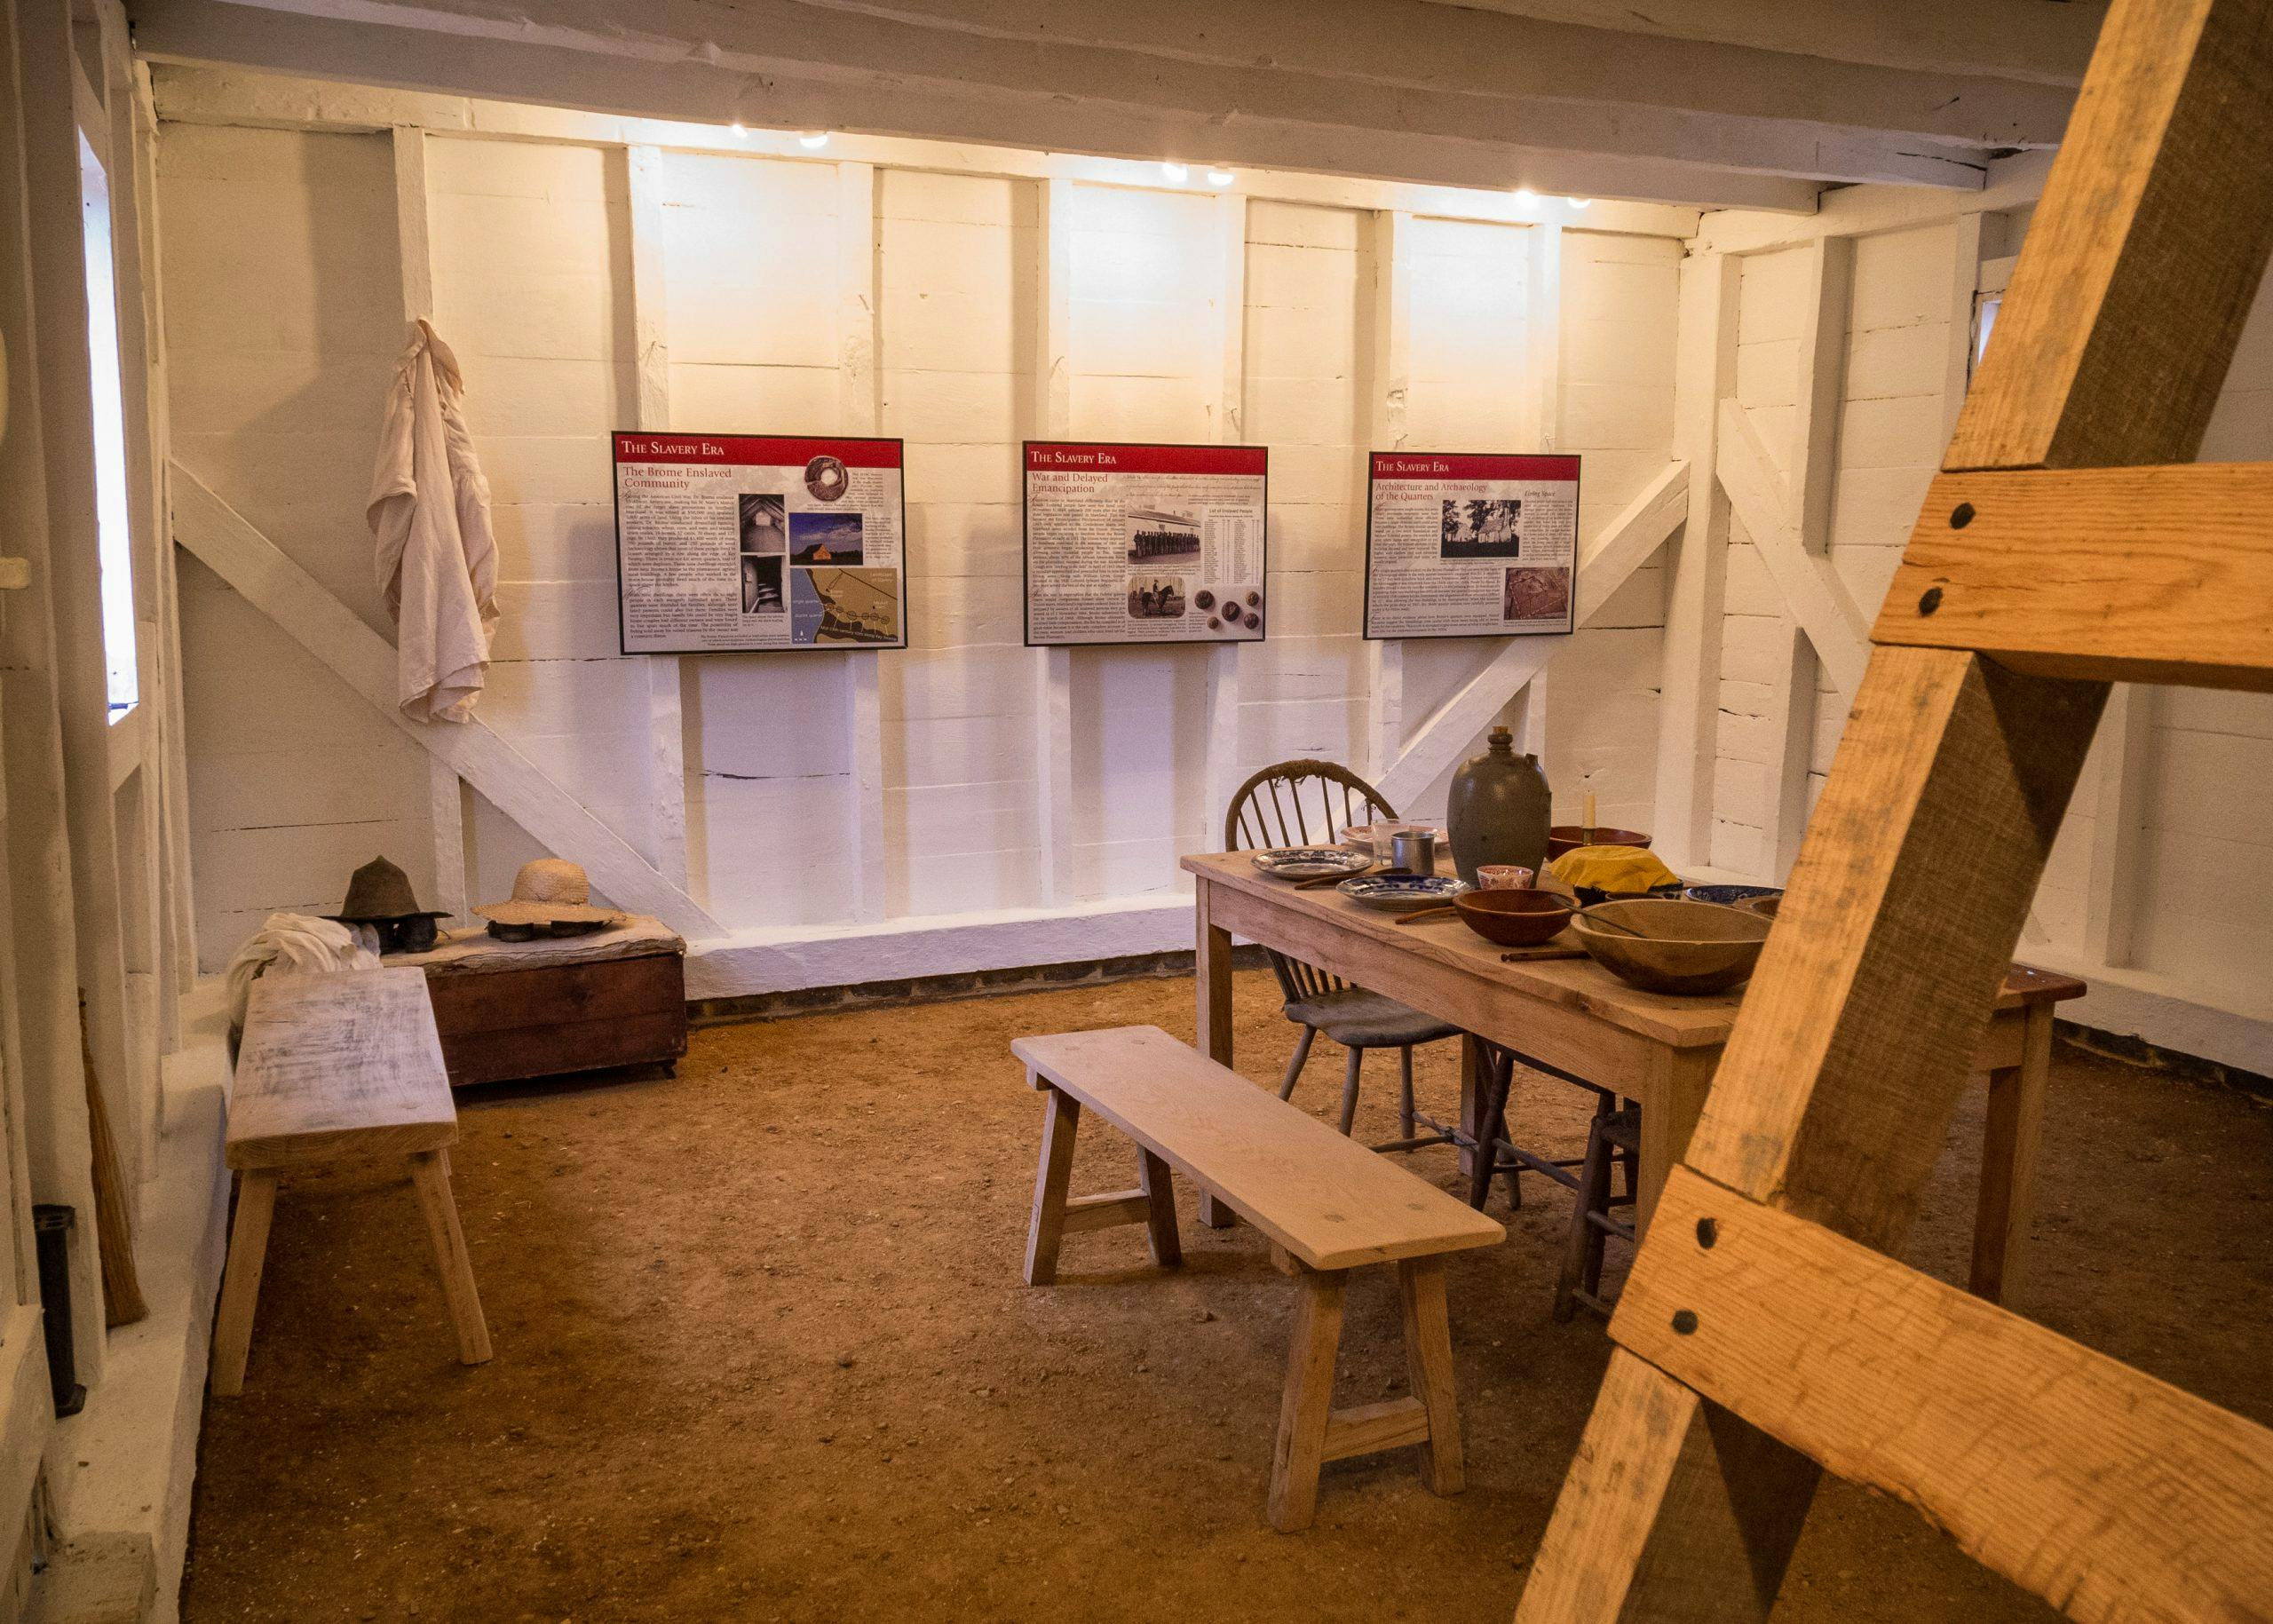 The Struggle for Freedom Exhibit at the Brome Quarter